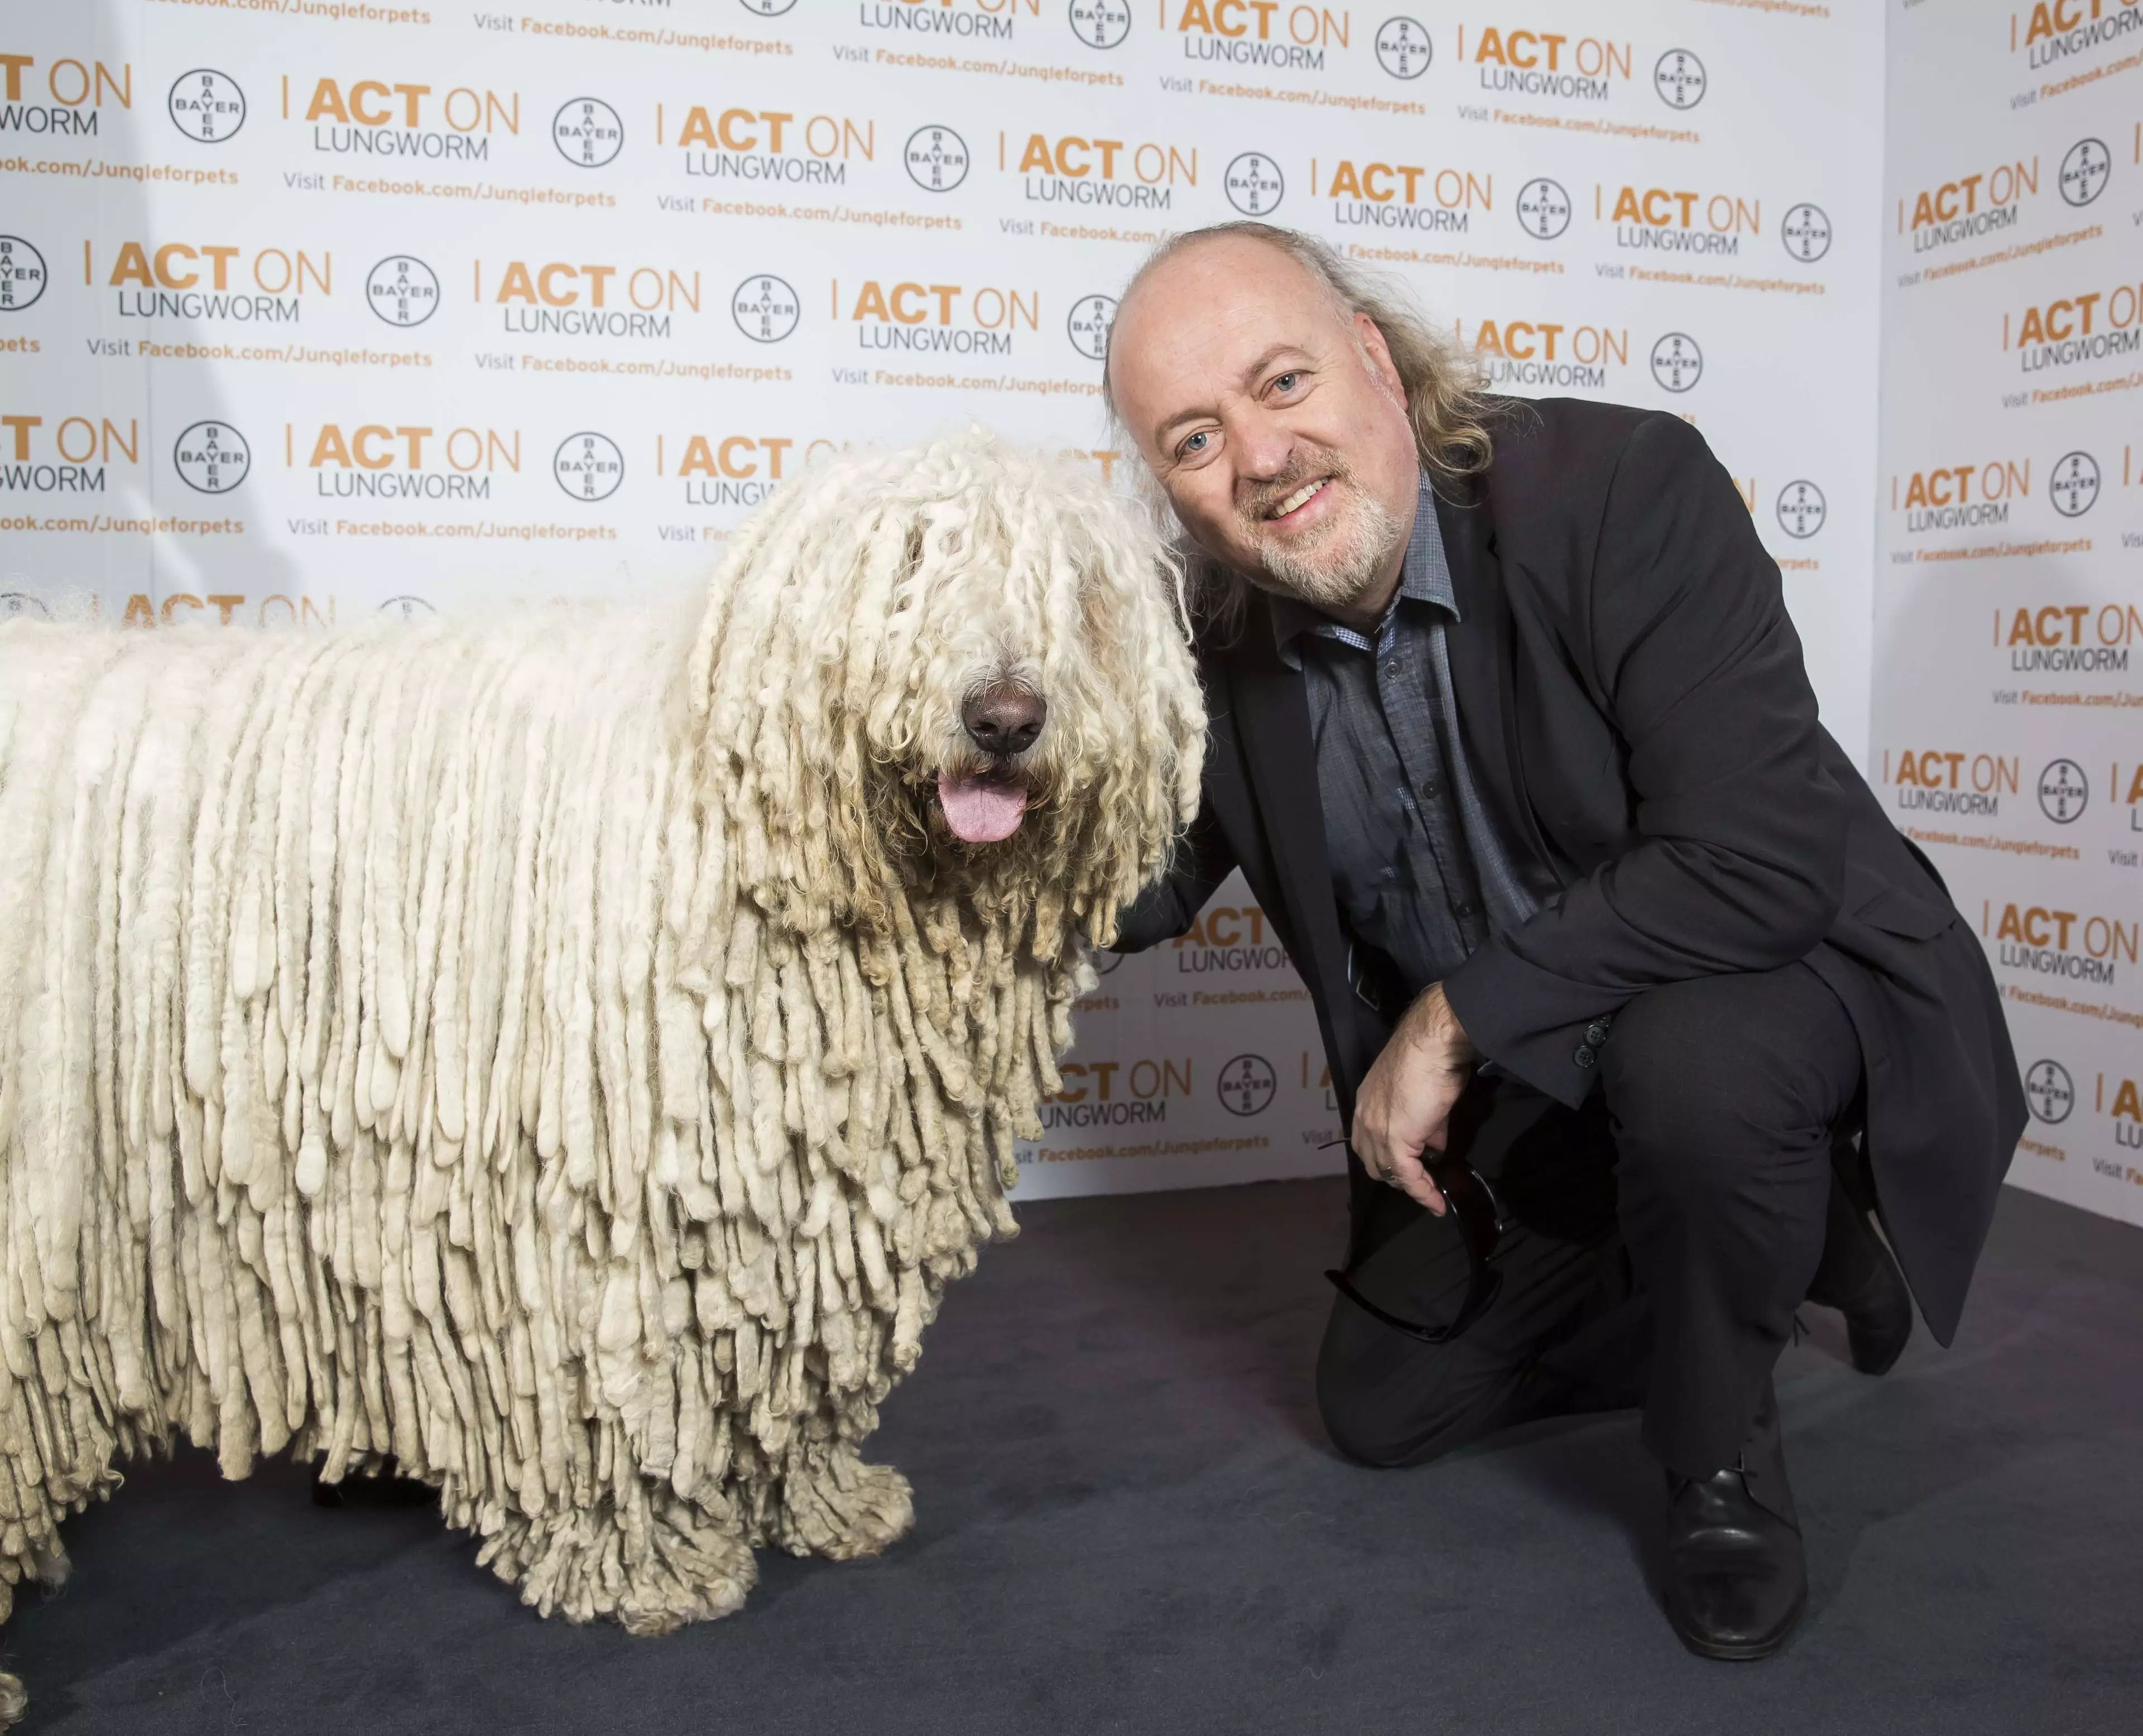 A hilarious shaggy-haired creature from the countryside, alongside a dog.